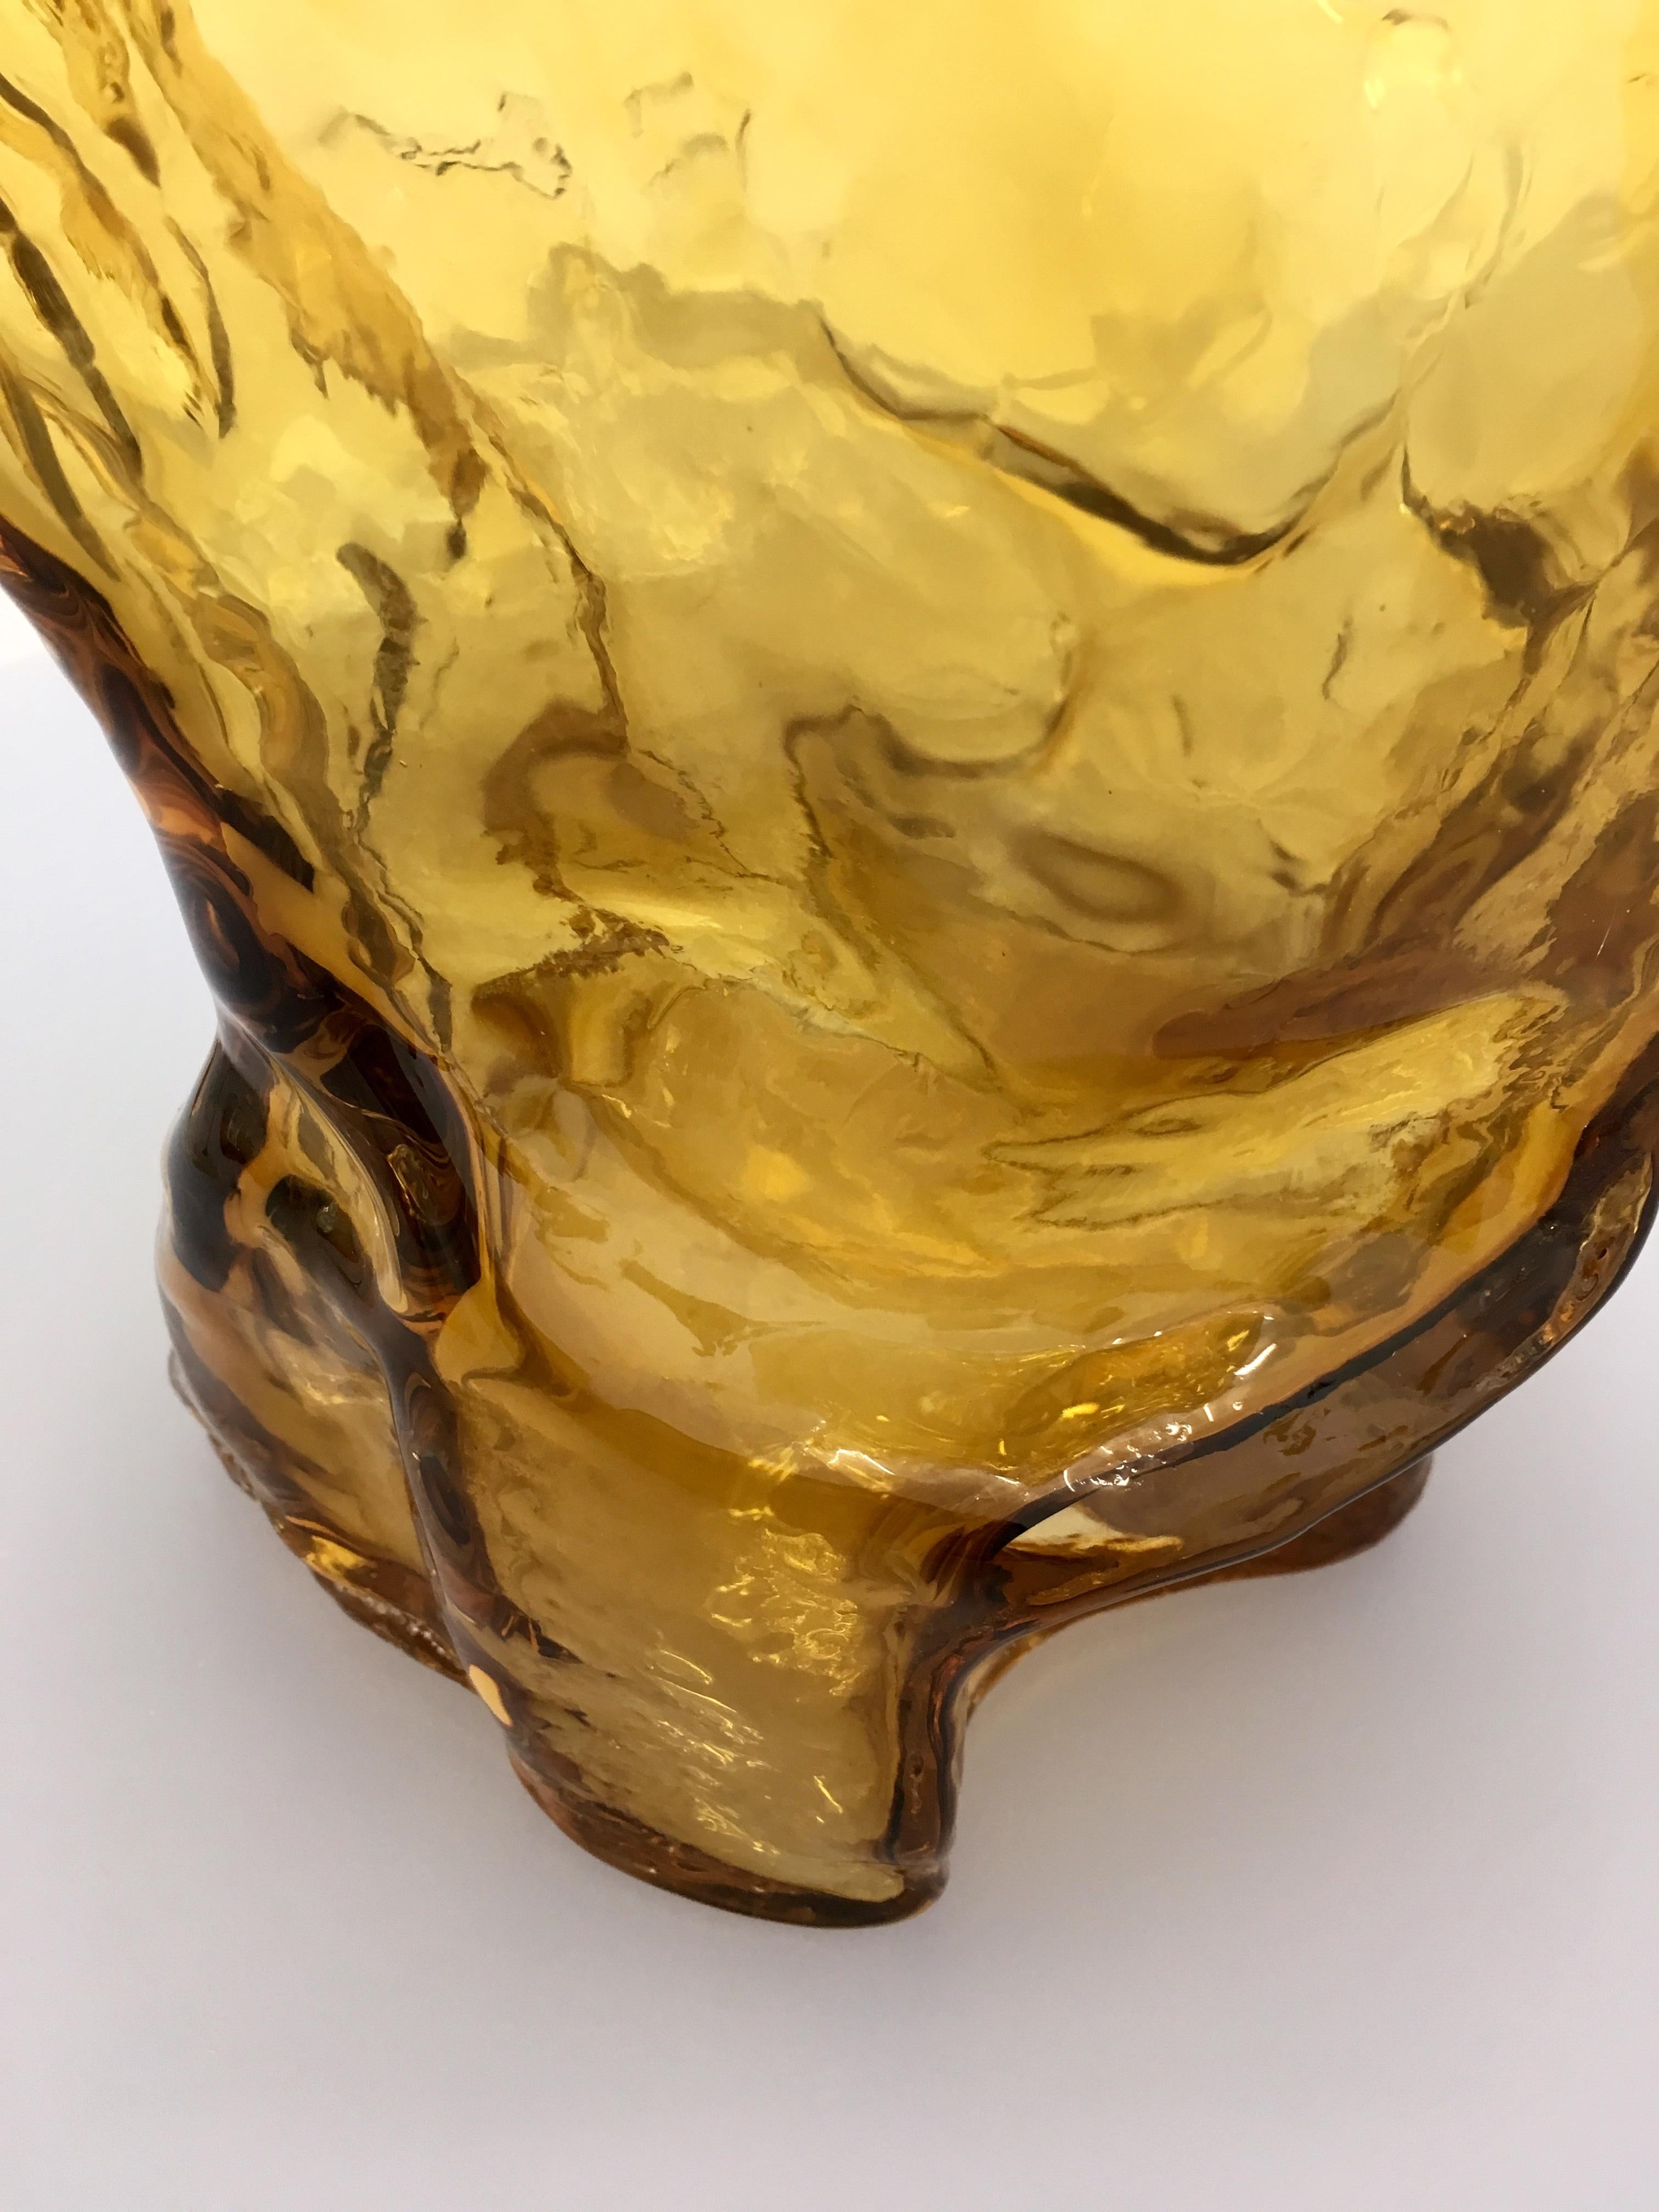 Danish Contemporary Design Unique Glass 'Mountain' Vase by Fos, Ginger